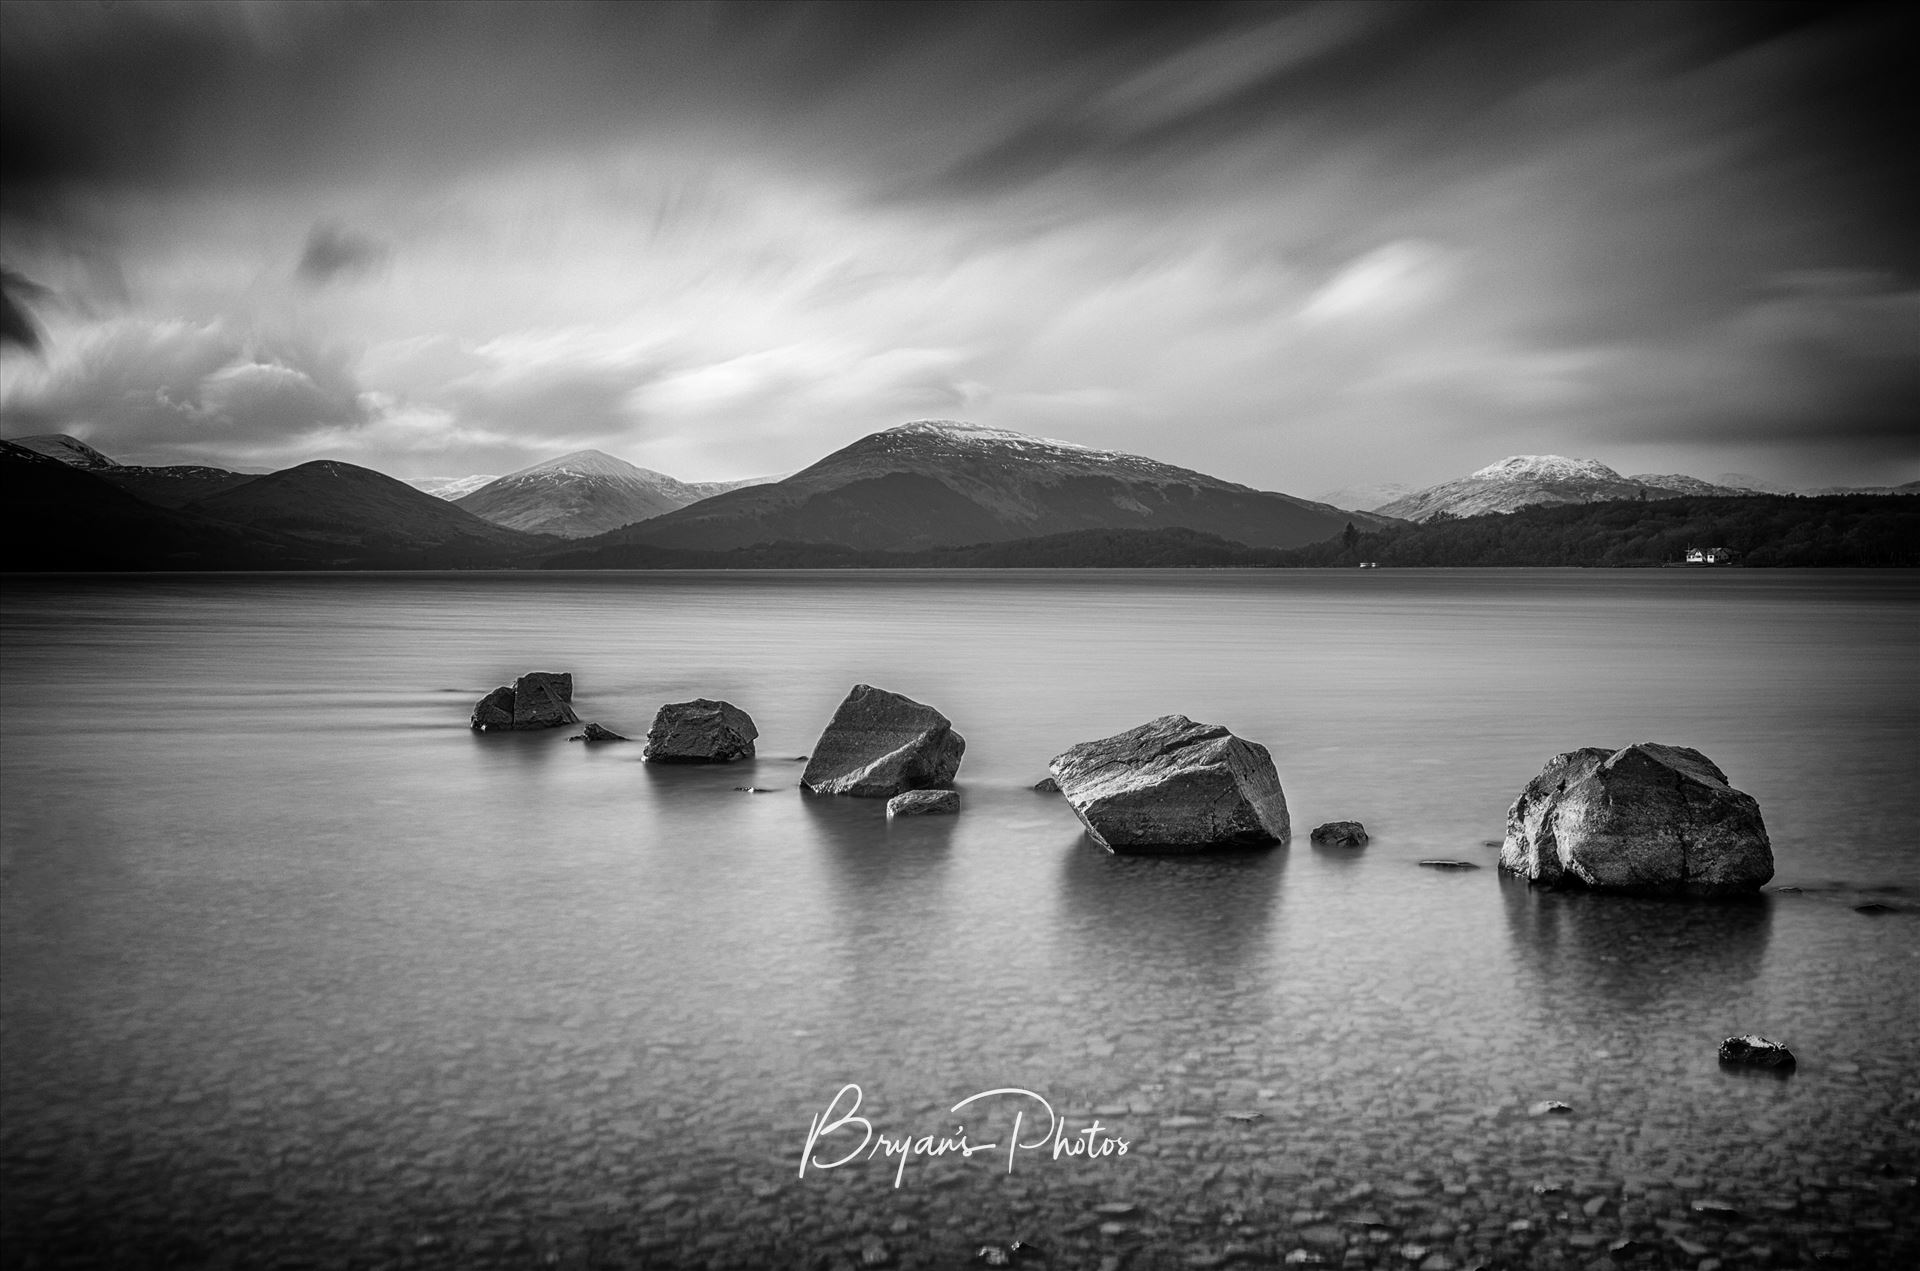 Milarrochy Rocks Landscape A black and white long exposure photograph of Loch Lomond taken from Milarrochy Bay. by Bryans Photos